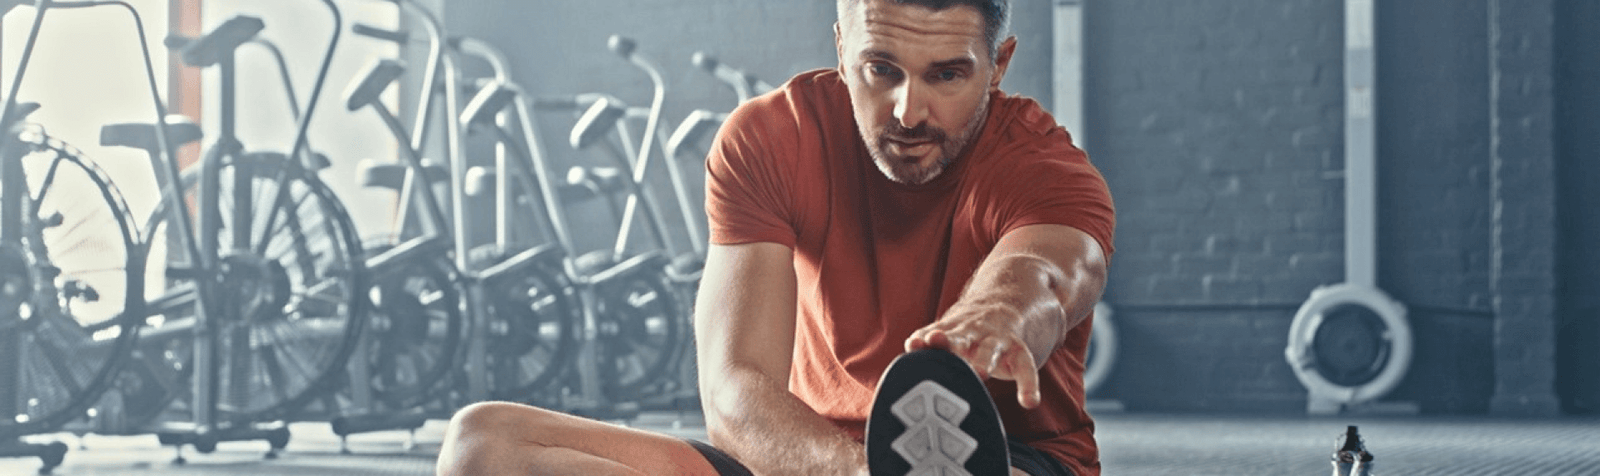 14 must-try exercises for people in their 40s. No. 12 is really easy